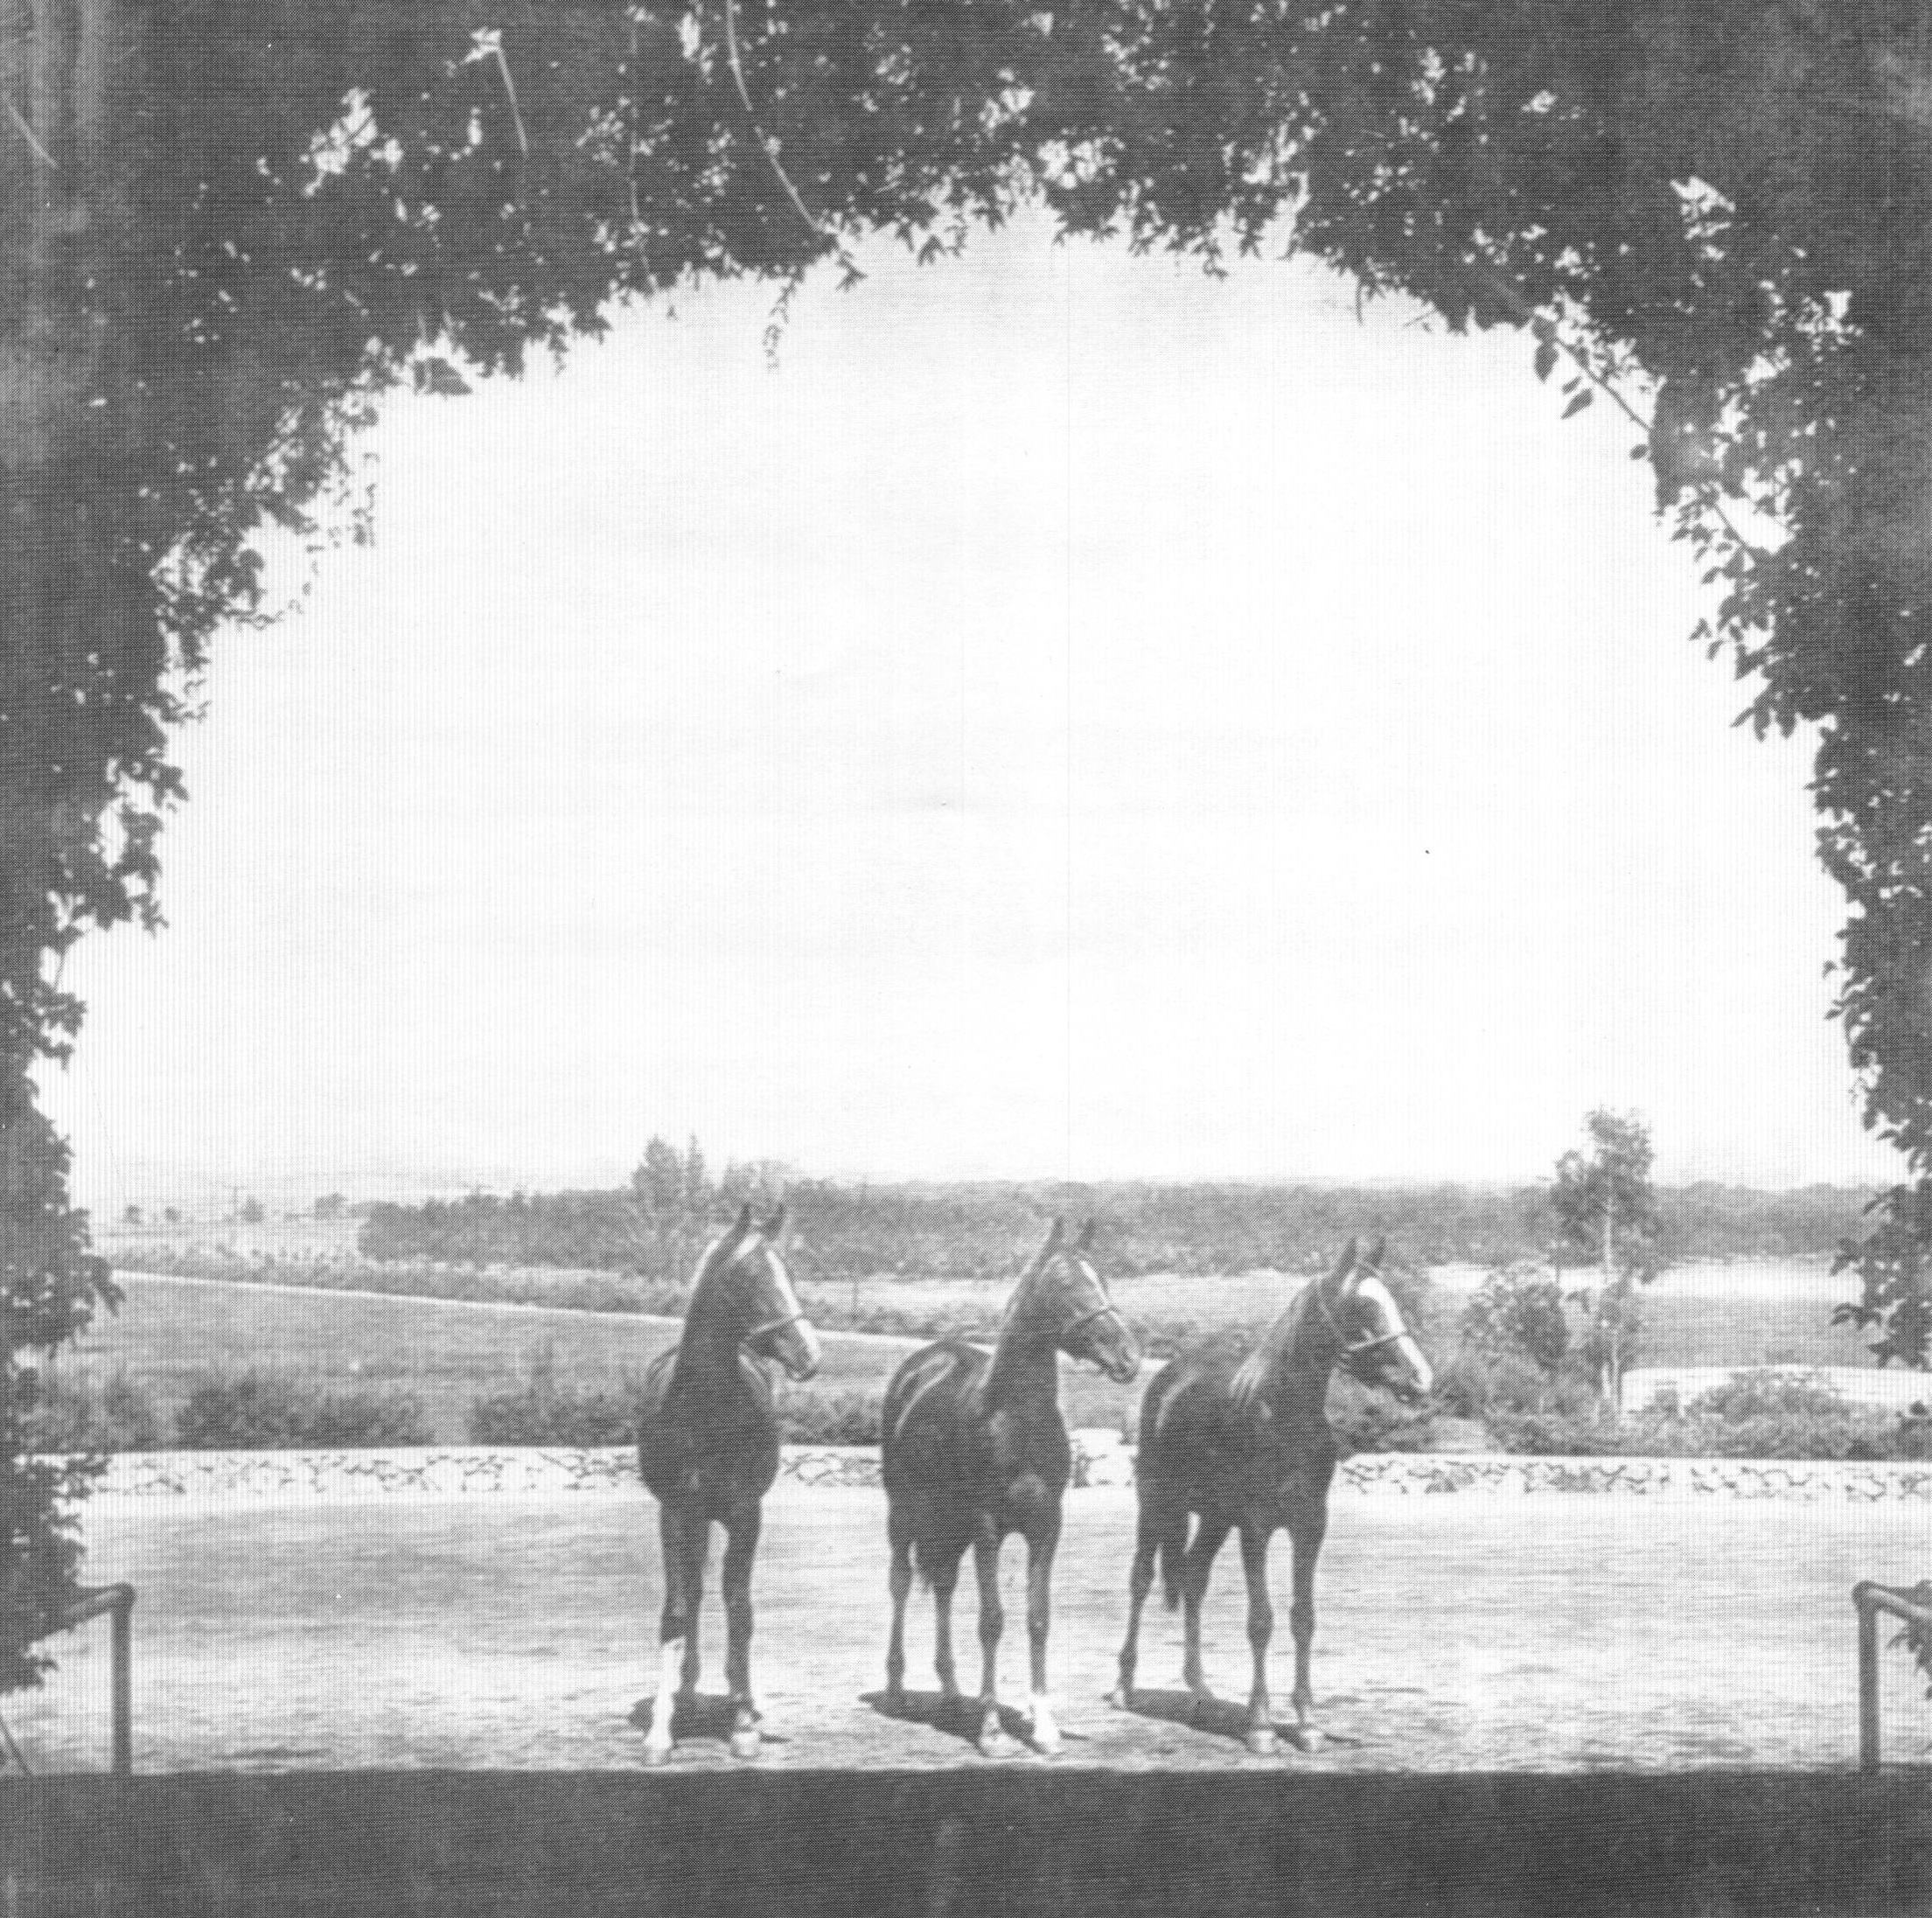 (Left to Right) Rifnada 836, Danas 842, and Ferdas 841. This photograph was taken from the entrance to the Kellogg stables; the horses are shown standing in the parking lot.